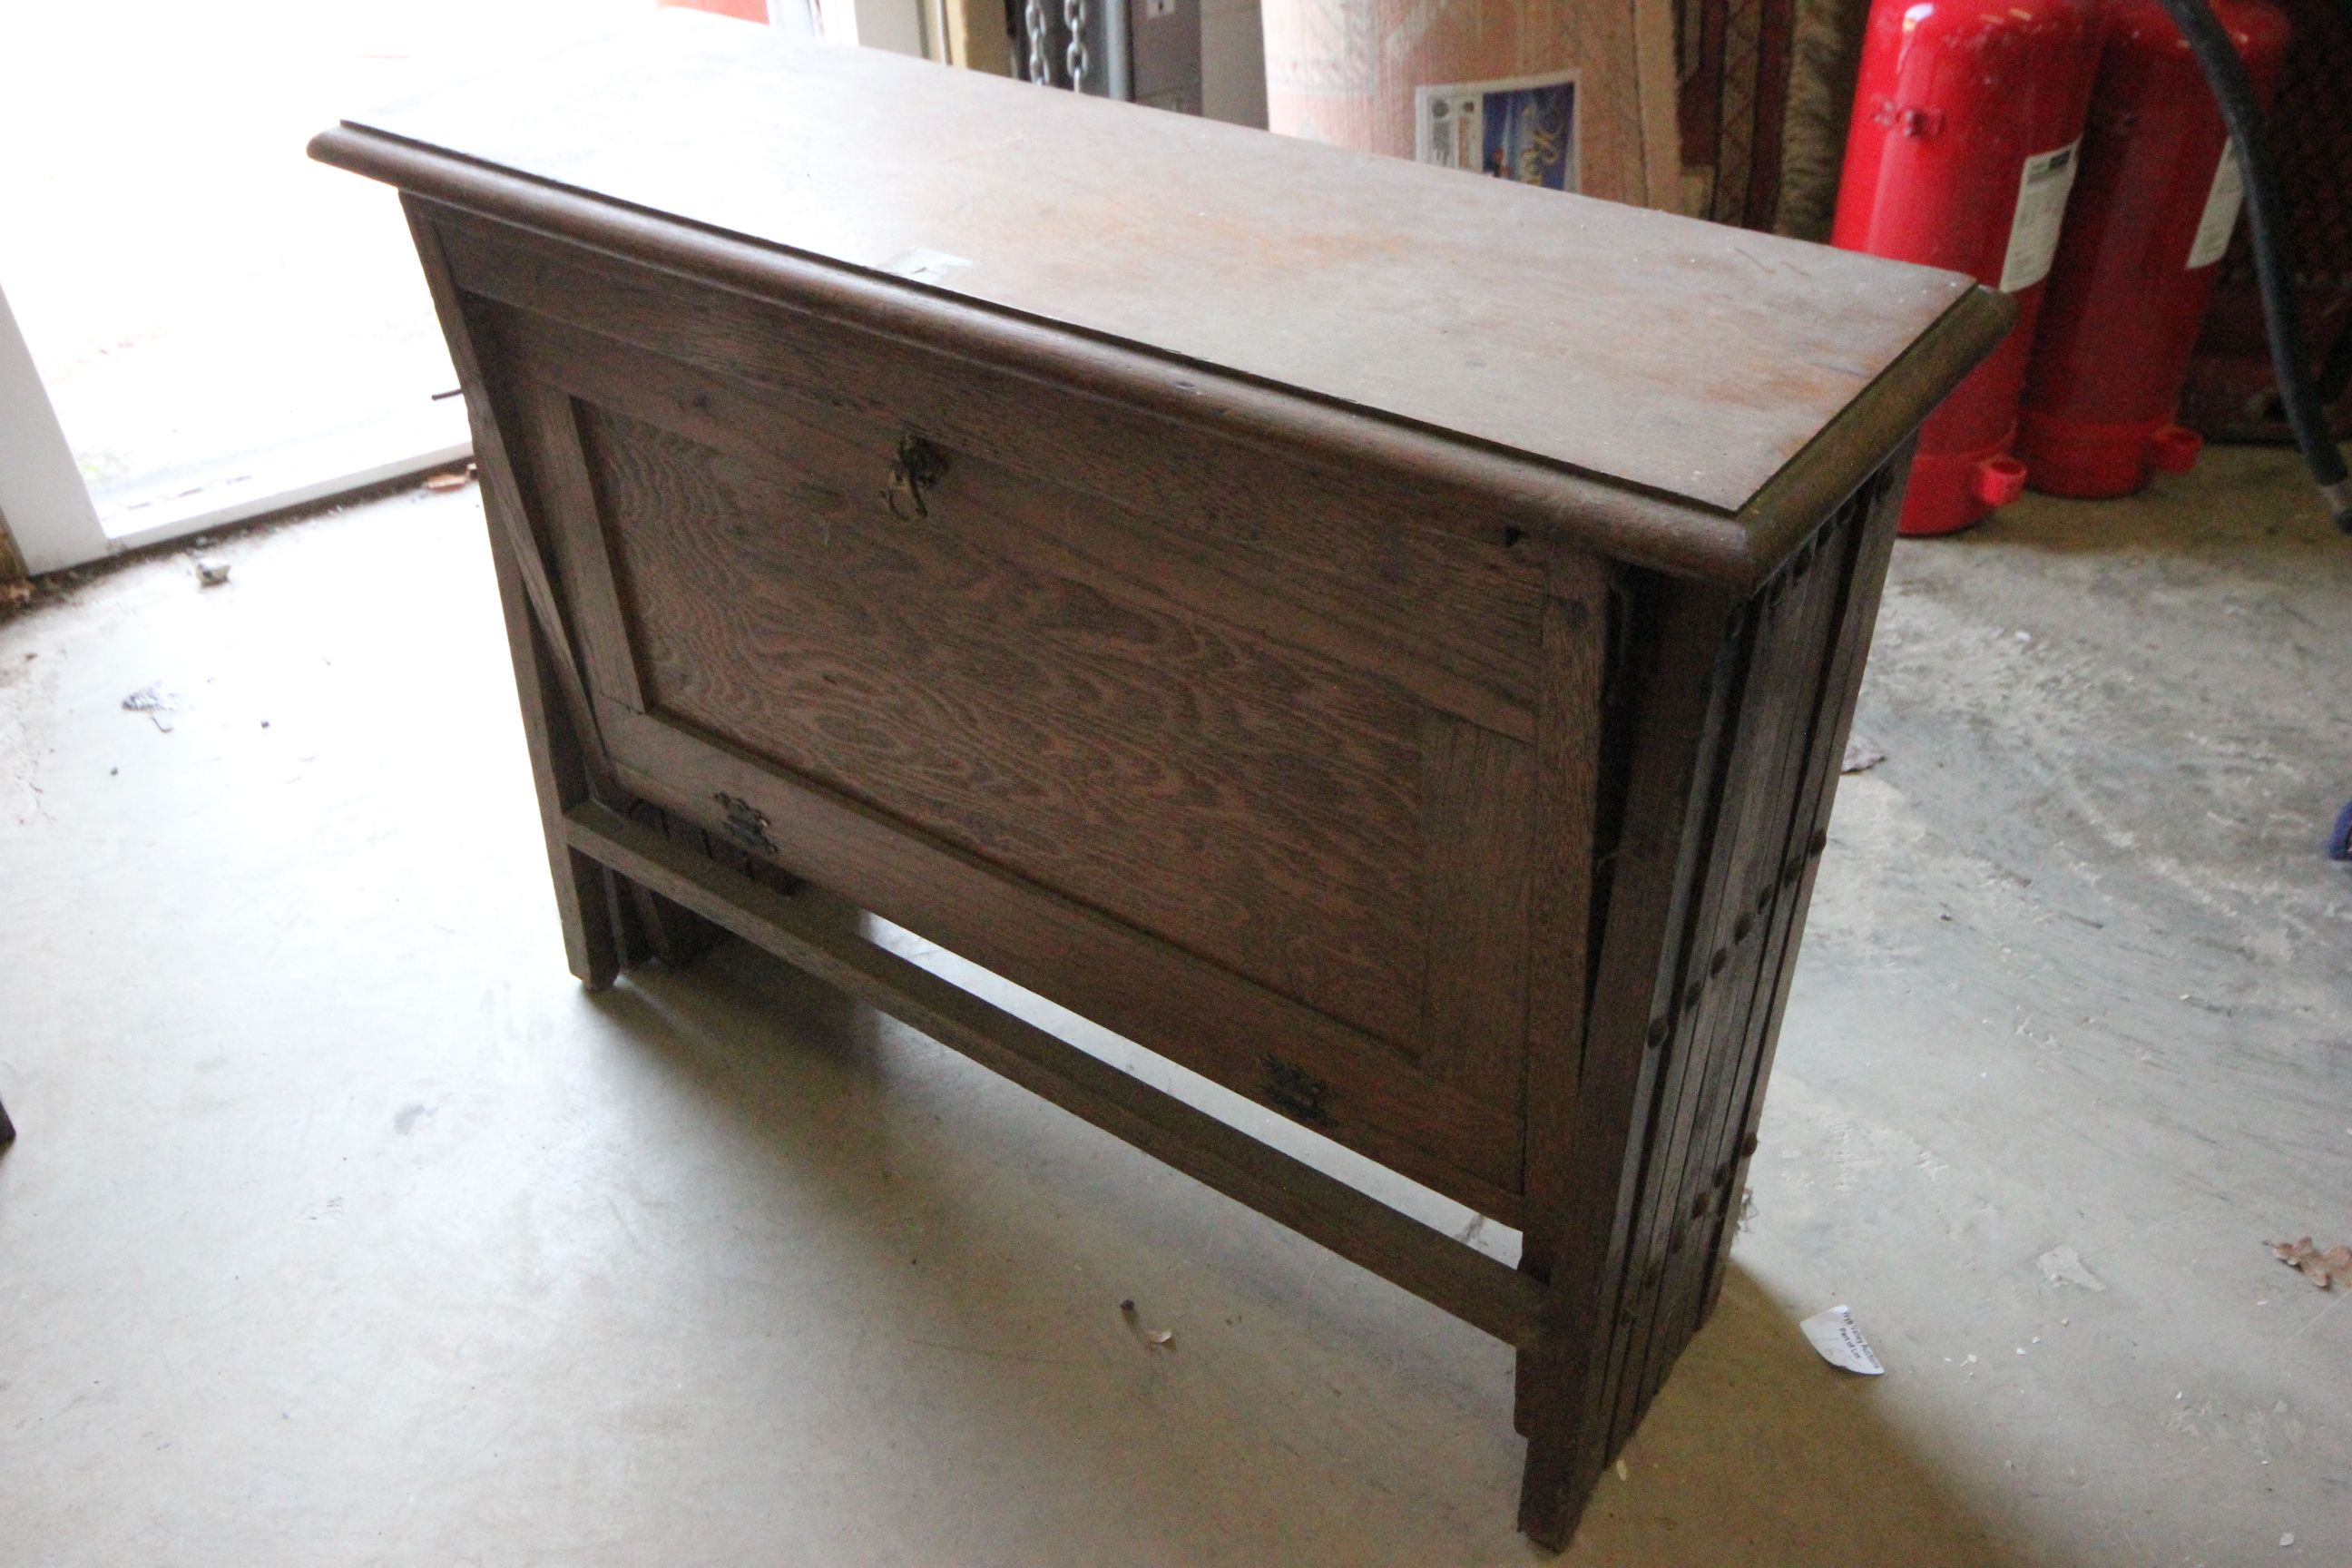 Early 20th century Oak Fold-Out Camp Bed